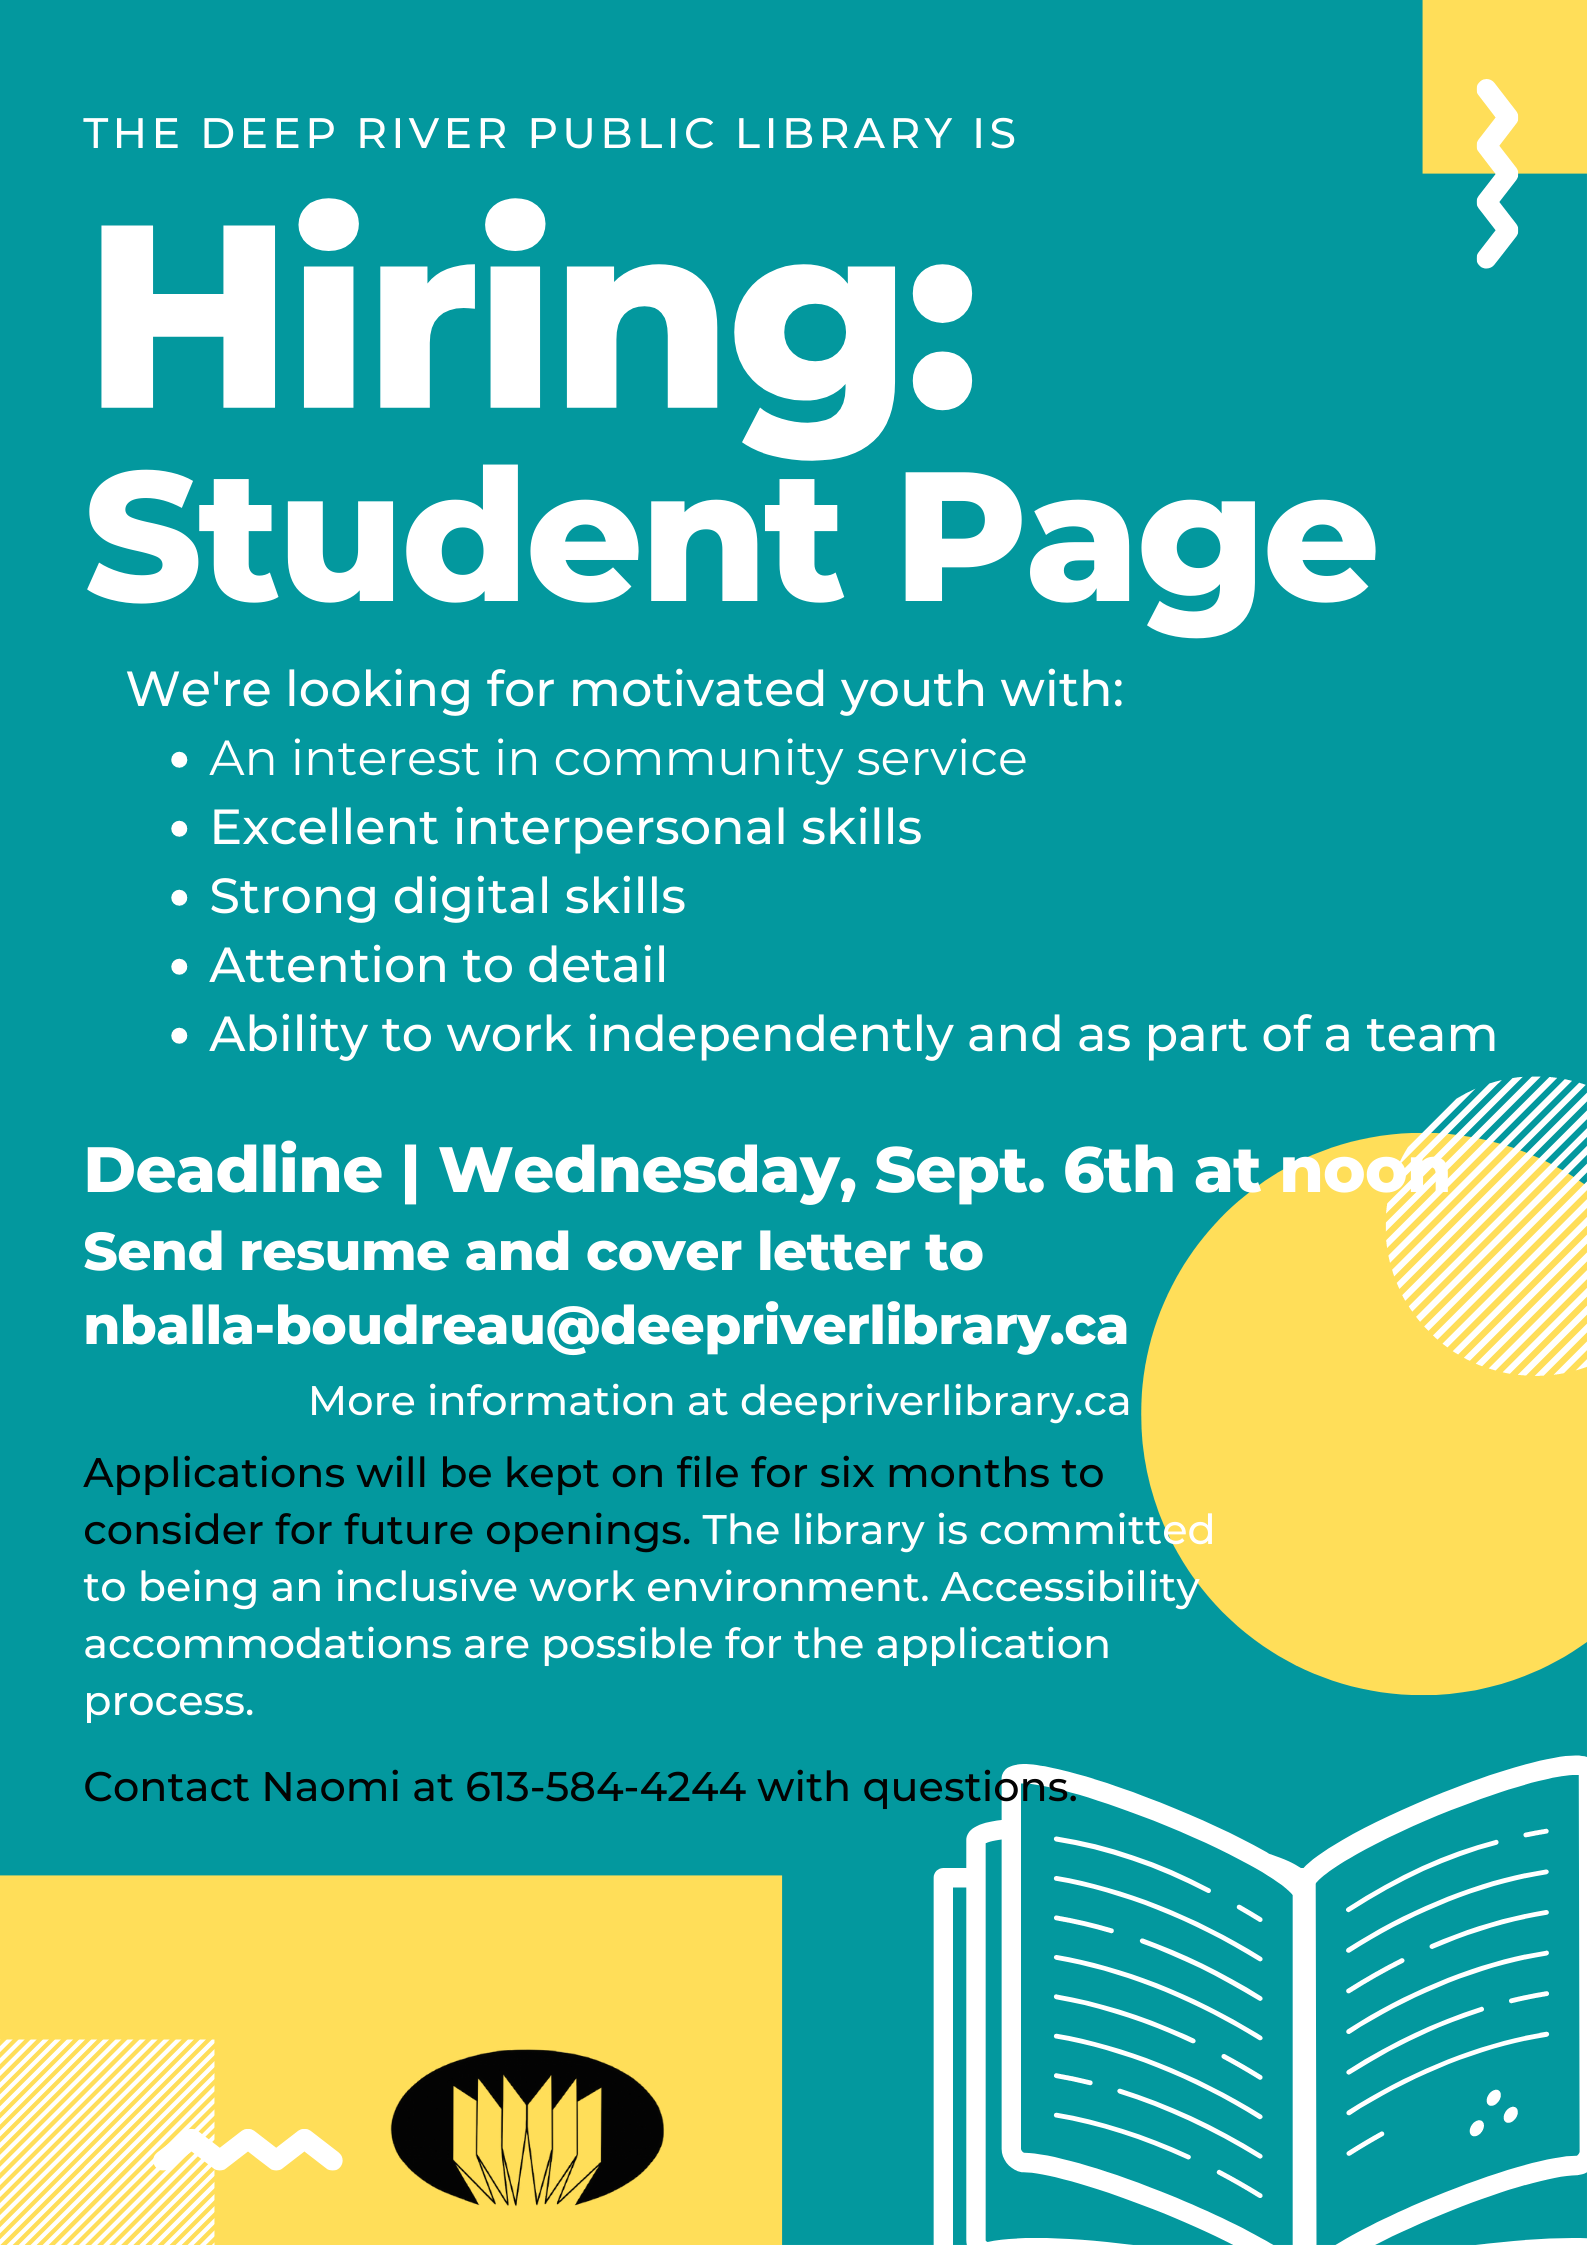 Teal poster with yellow splashes advertizing student page position opening. Geometric shapes and an outline of a book.